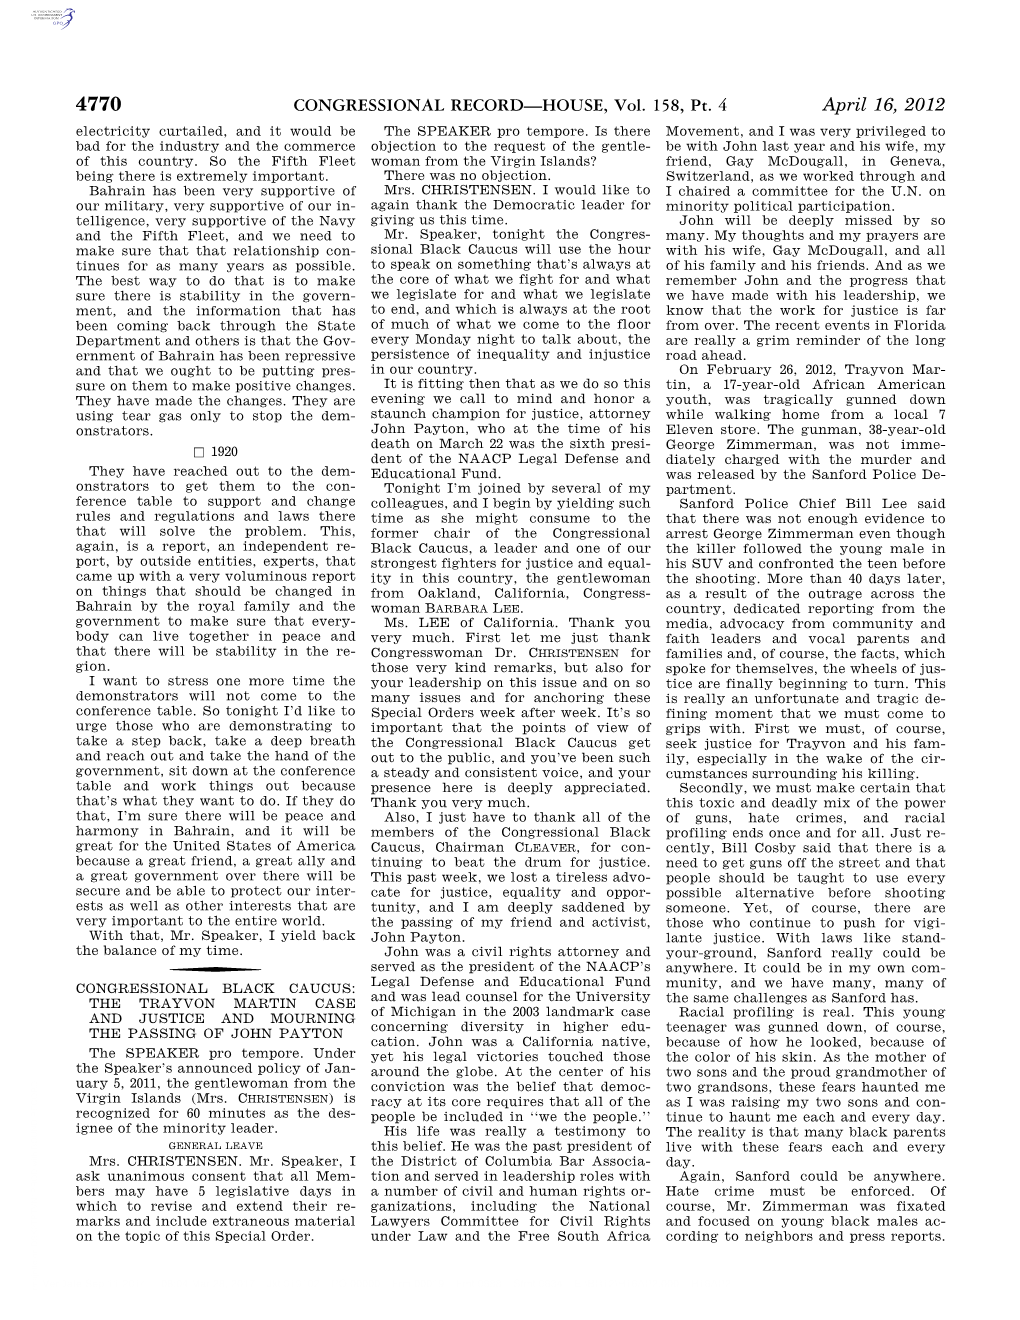 CONGRESSIONAL RECORD—HOUSE, Vol. 158, Pt. 4 April 16, 2012 Electricity Curtailed, and It Would Be the SPEAKER Pro Tempore